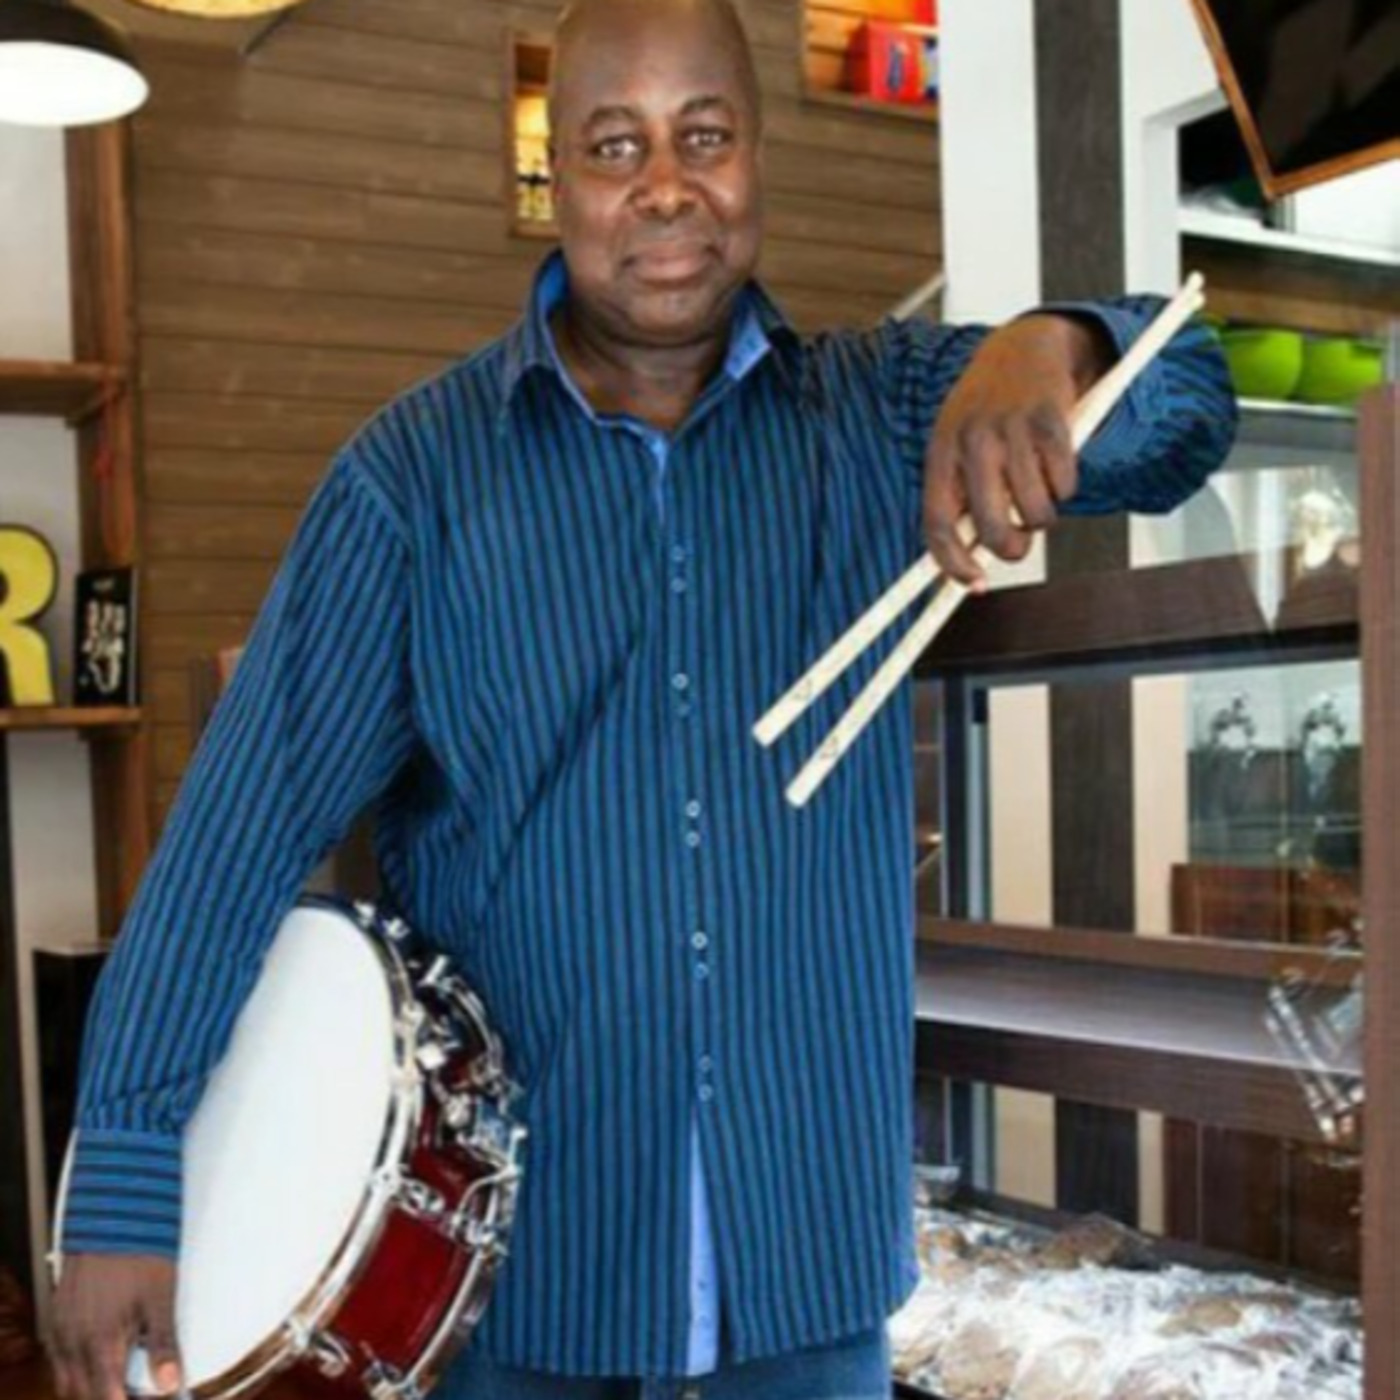 Episode 2473: Ralph Rolle ~  of Chic with Nile Rodgers, Celebrity Percussionist, CEO of Soul Snacks Cookie Co. in Hilton Resorts, Kroger Walmart. Worldwide!!